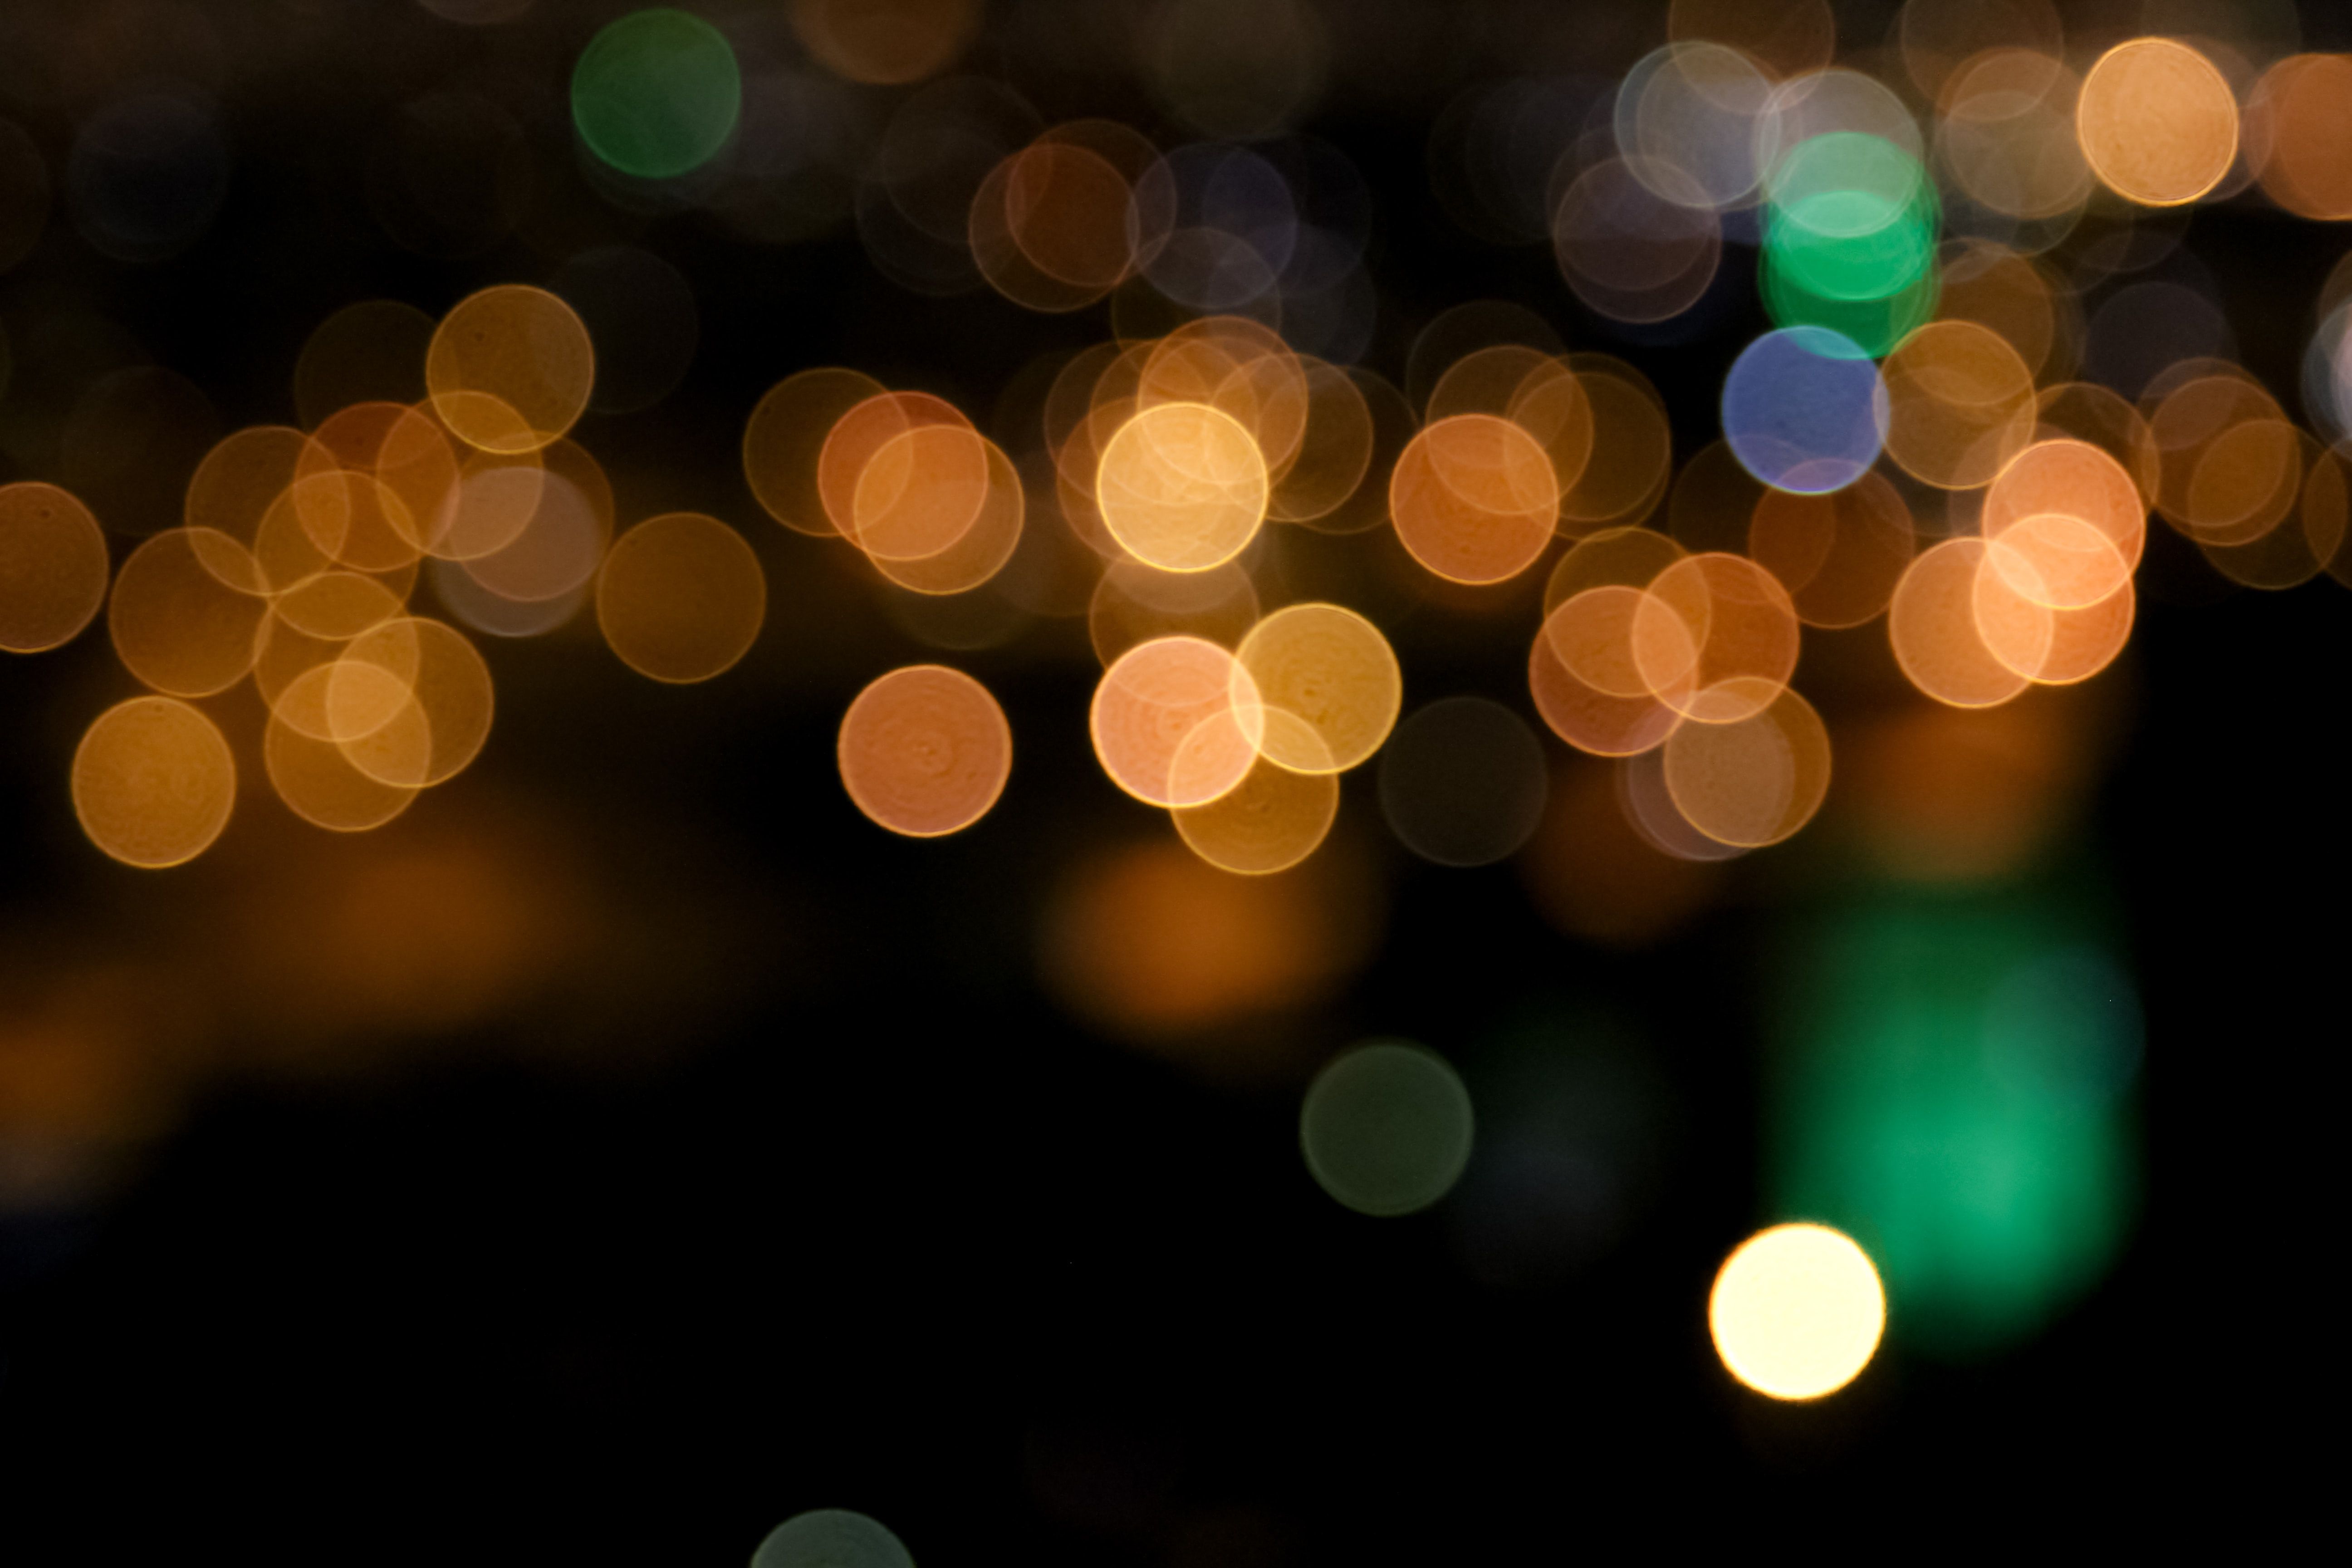 Bokeh indicates that the light is not in focus.